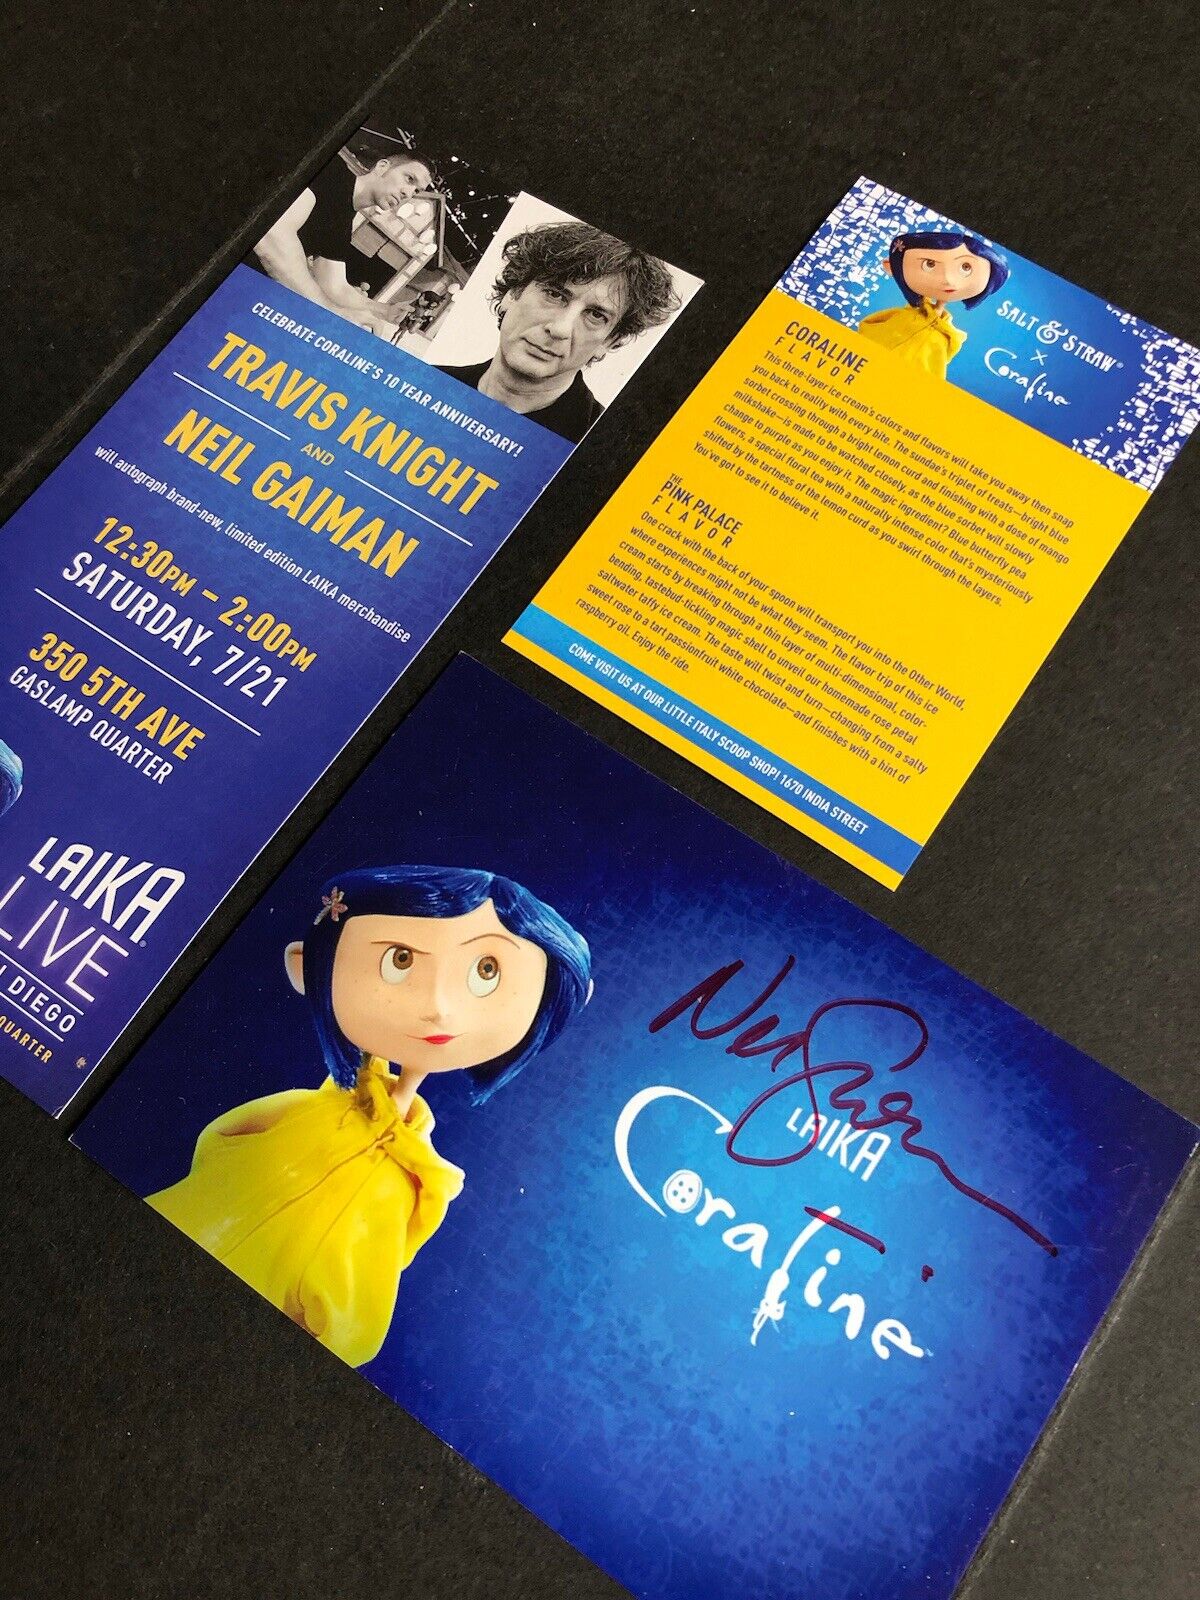 Signed Neil Gaiman Coraline 10 year anniversary Laika SDCC event collectibles